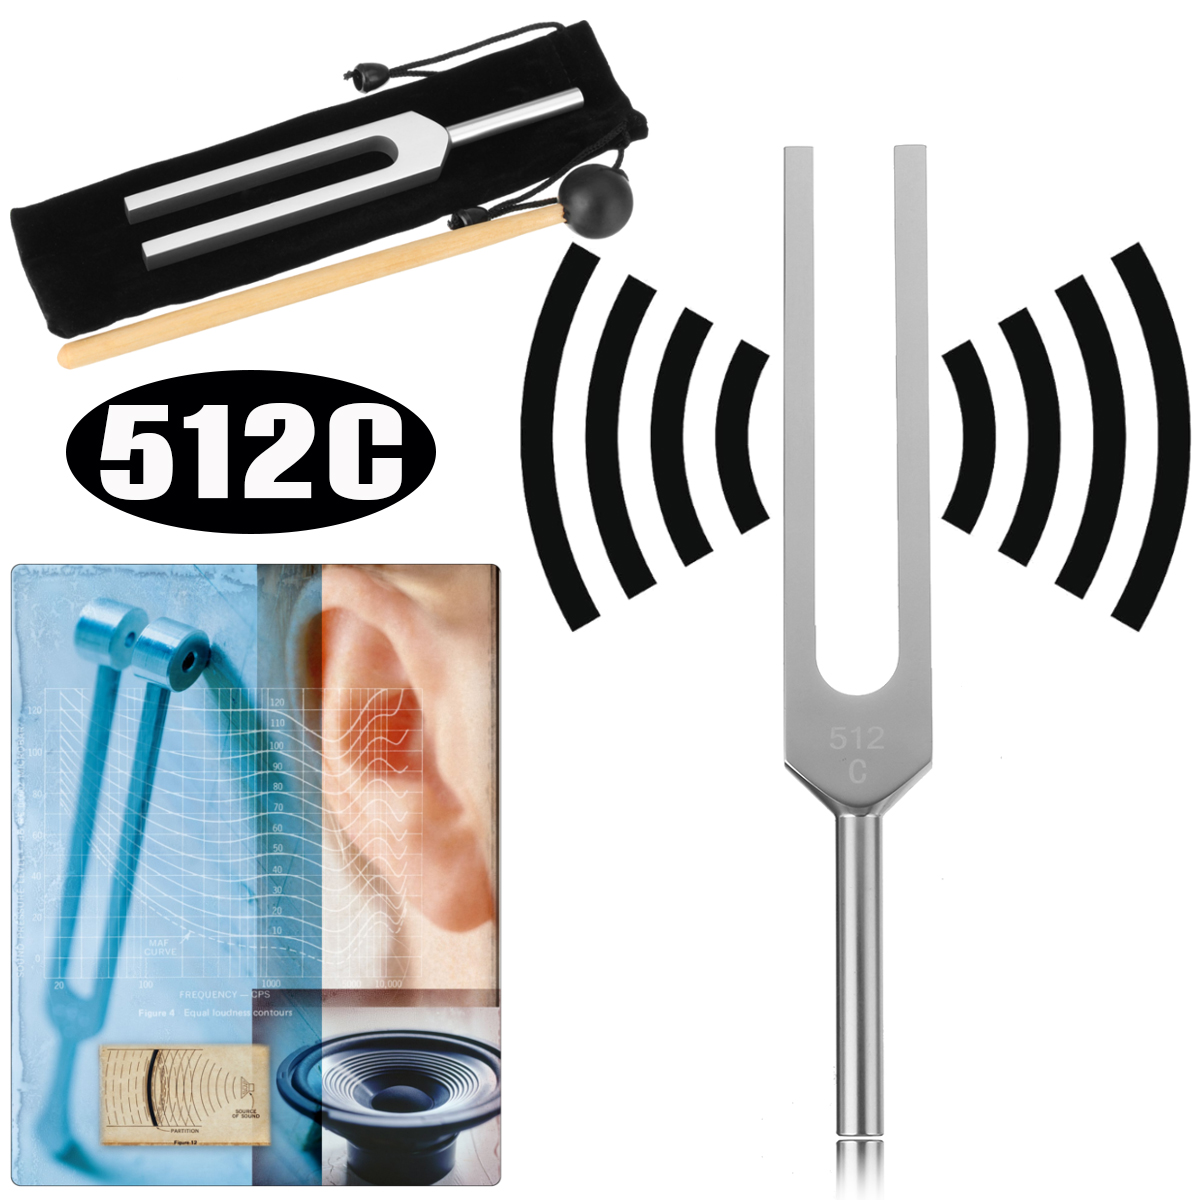 512HZ-Tuning-Fork-Surgical-Diagnostic-Medical-Instrument-Physical-Chakra-Hammer-1437018-1